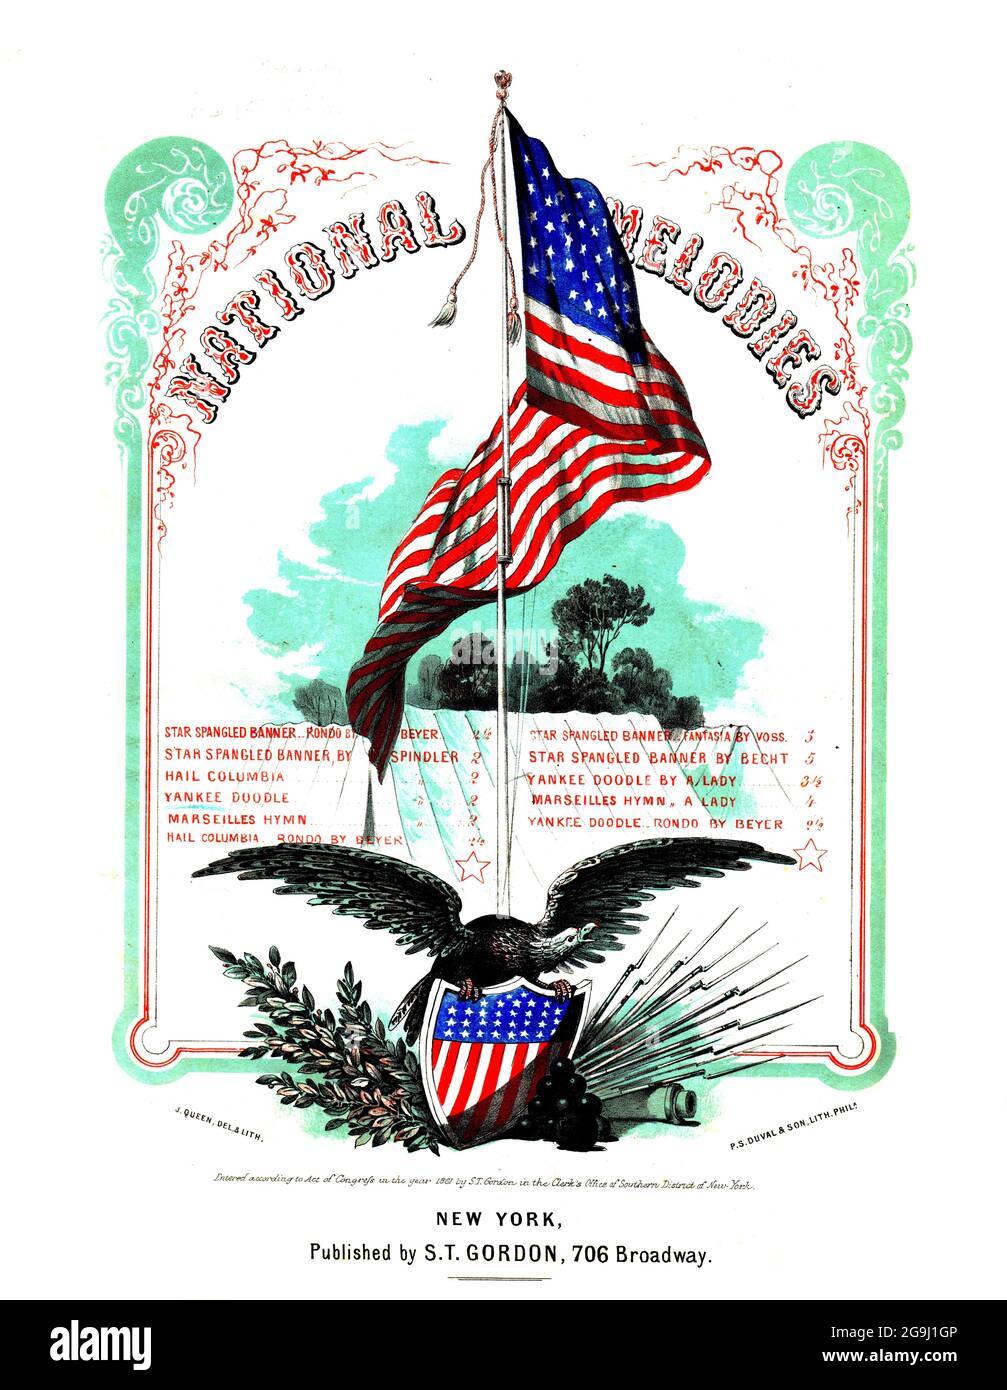 National Melodies, 1861 chromolithographic sheet music qith eagle and American flag. Hail Columbia, Start Spangled Banner & Yankee Doodle Stock Photo